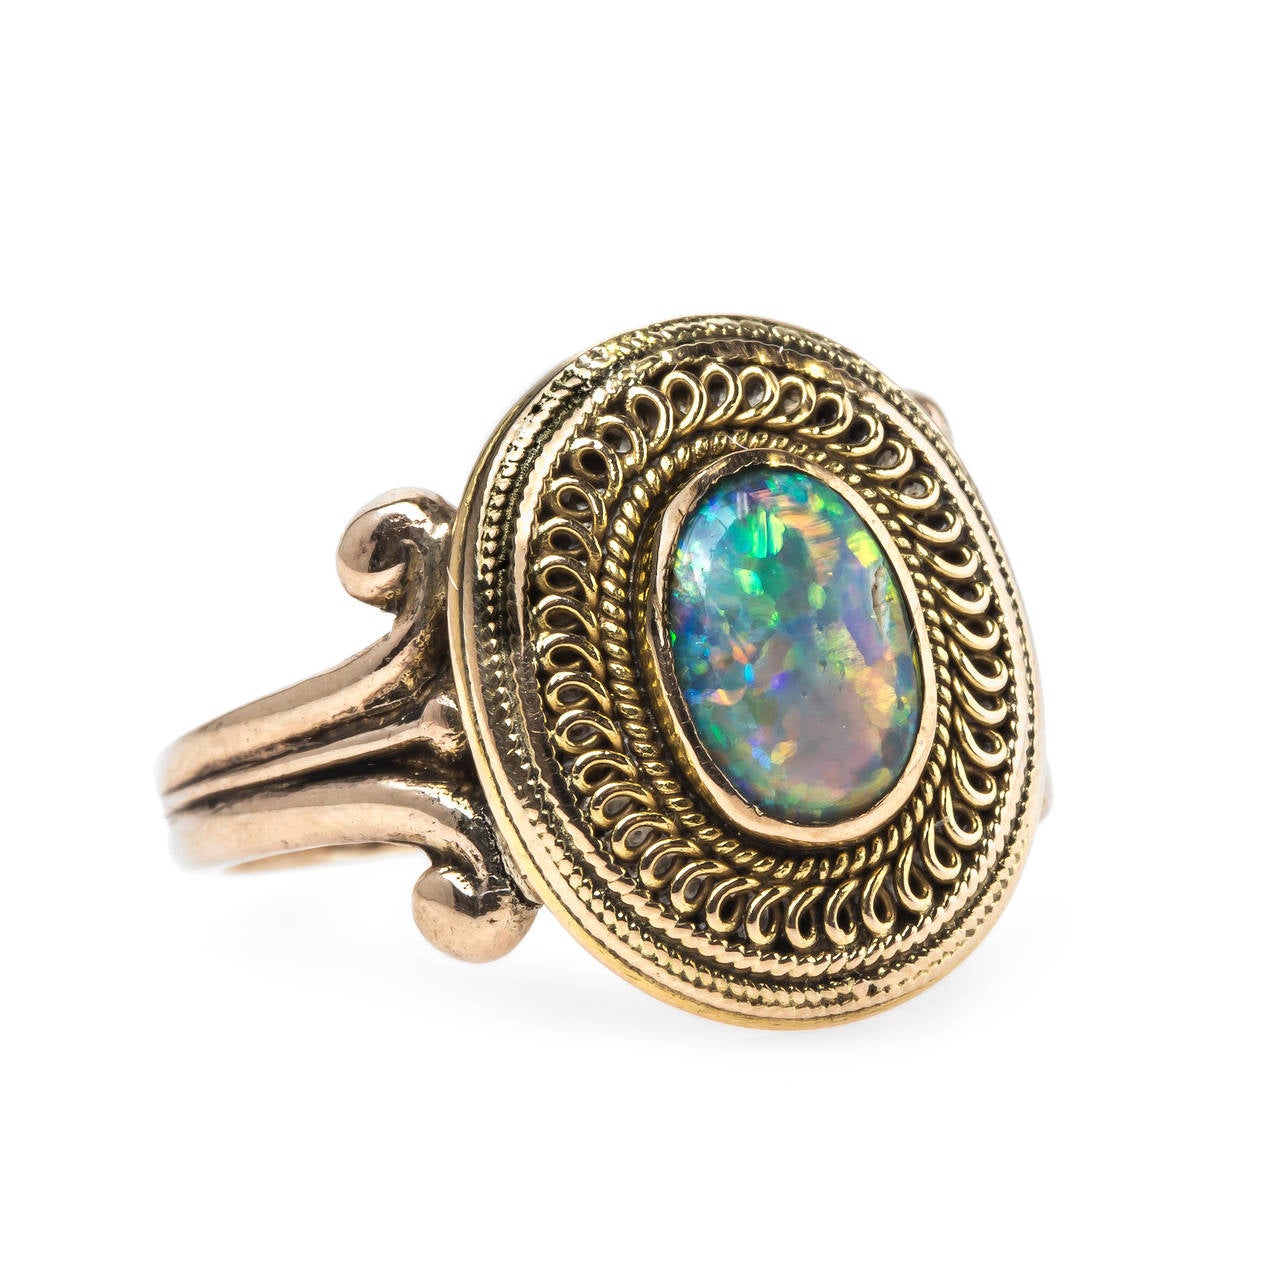 Cheyenne is a unique authentic Victorian era (circa 1900) 18k yellow gold and 14k yellow ring centering an incredible bezel set black cabochon oval opal gauged at 8mm x 6mm displaying an array of rainbow play-of-color. Cheyenne is further surrounded